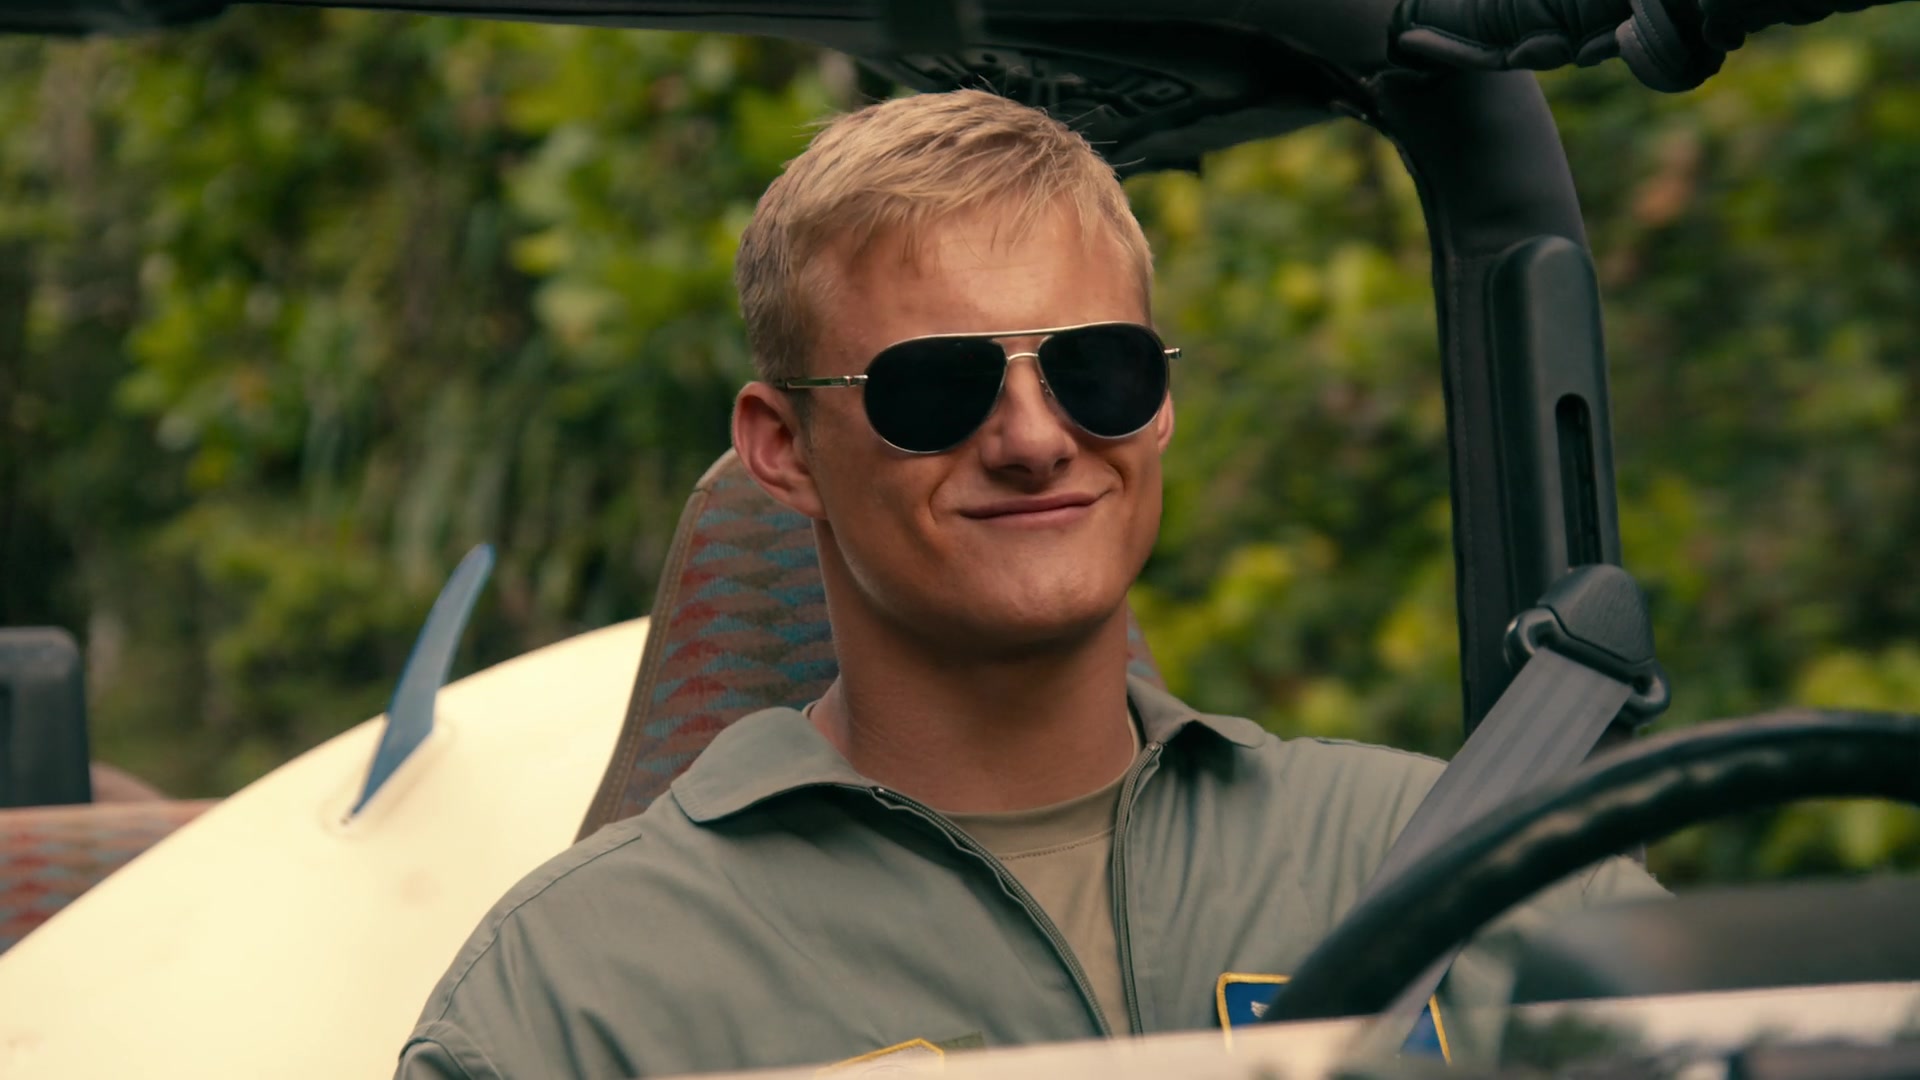 Tom Ford Marko Pilot Sunglasses Of Alexander Ludwig As Captain Andrew Jantz  In Operation Christmas Drop (2020)